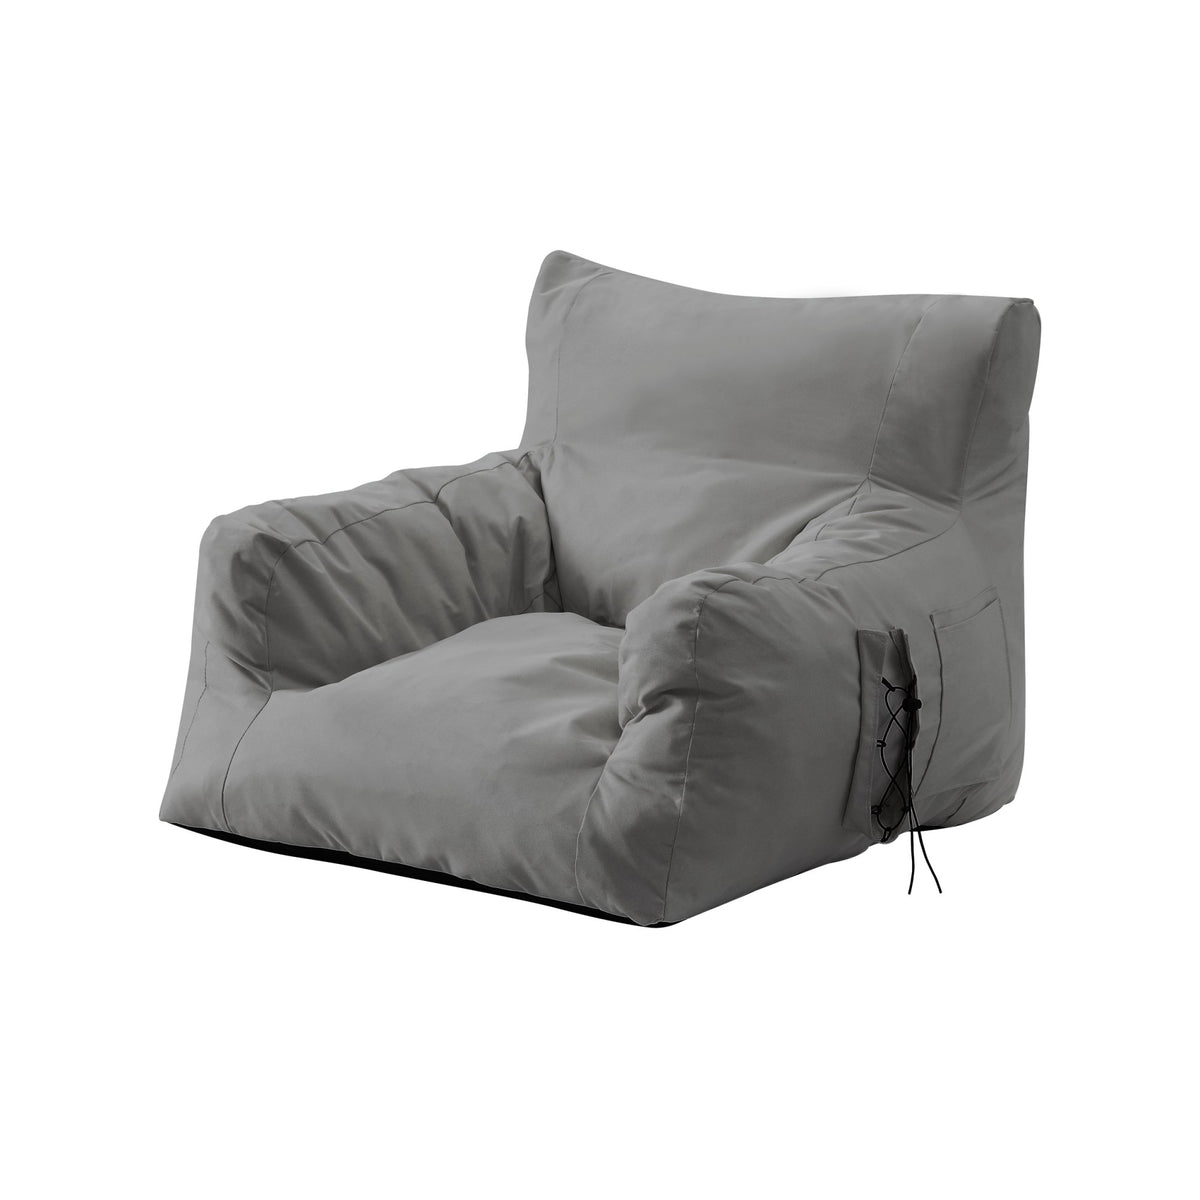 Loungie Nylon Bean Bag Chair Indoor/Outdoor Water Resistant - Loungie Living